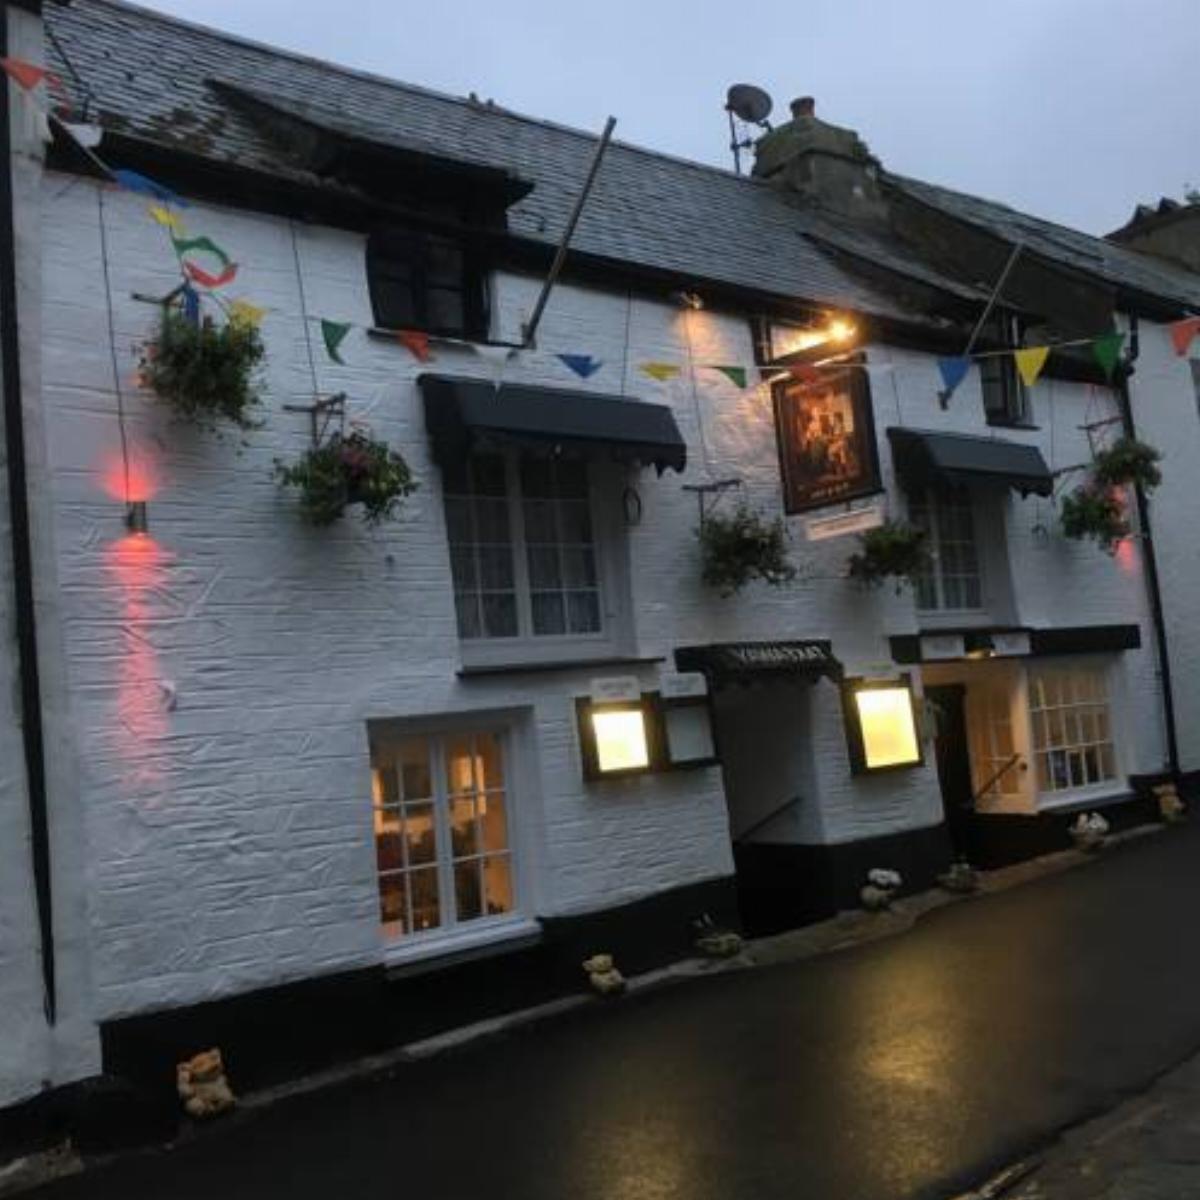 The Noughts and Crosses Inn